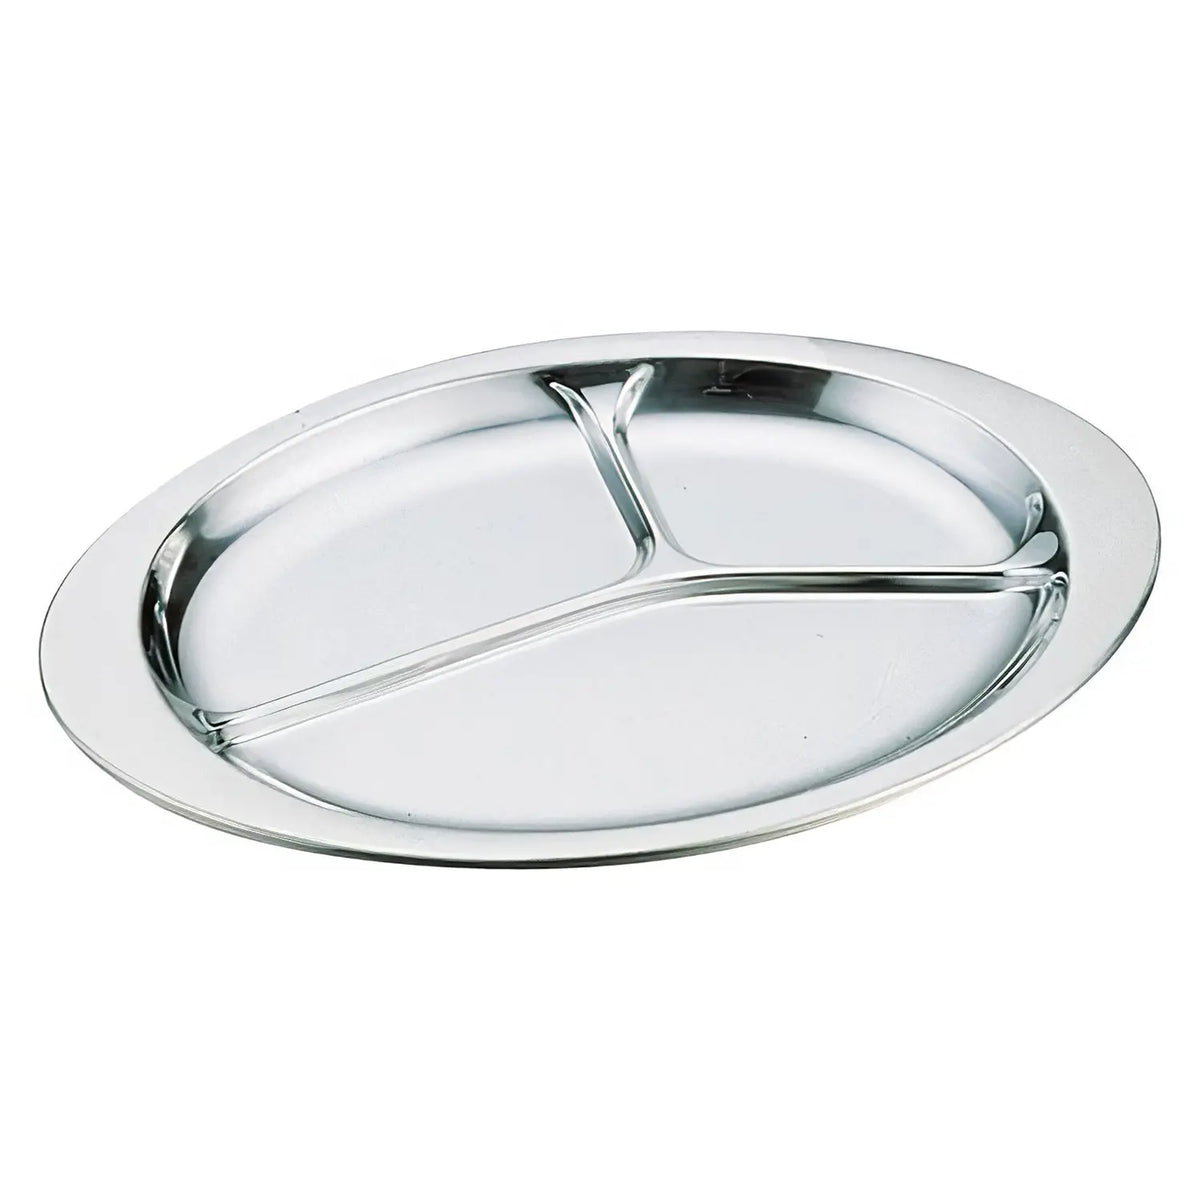 IKD Stainless Steel Antibacterial 3 Compartments Oval Lunch Plate